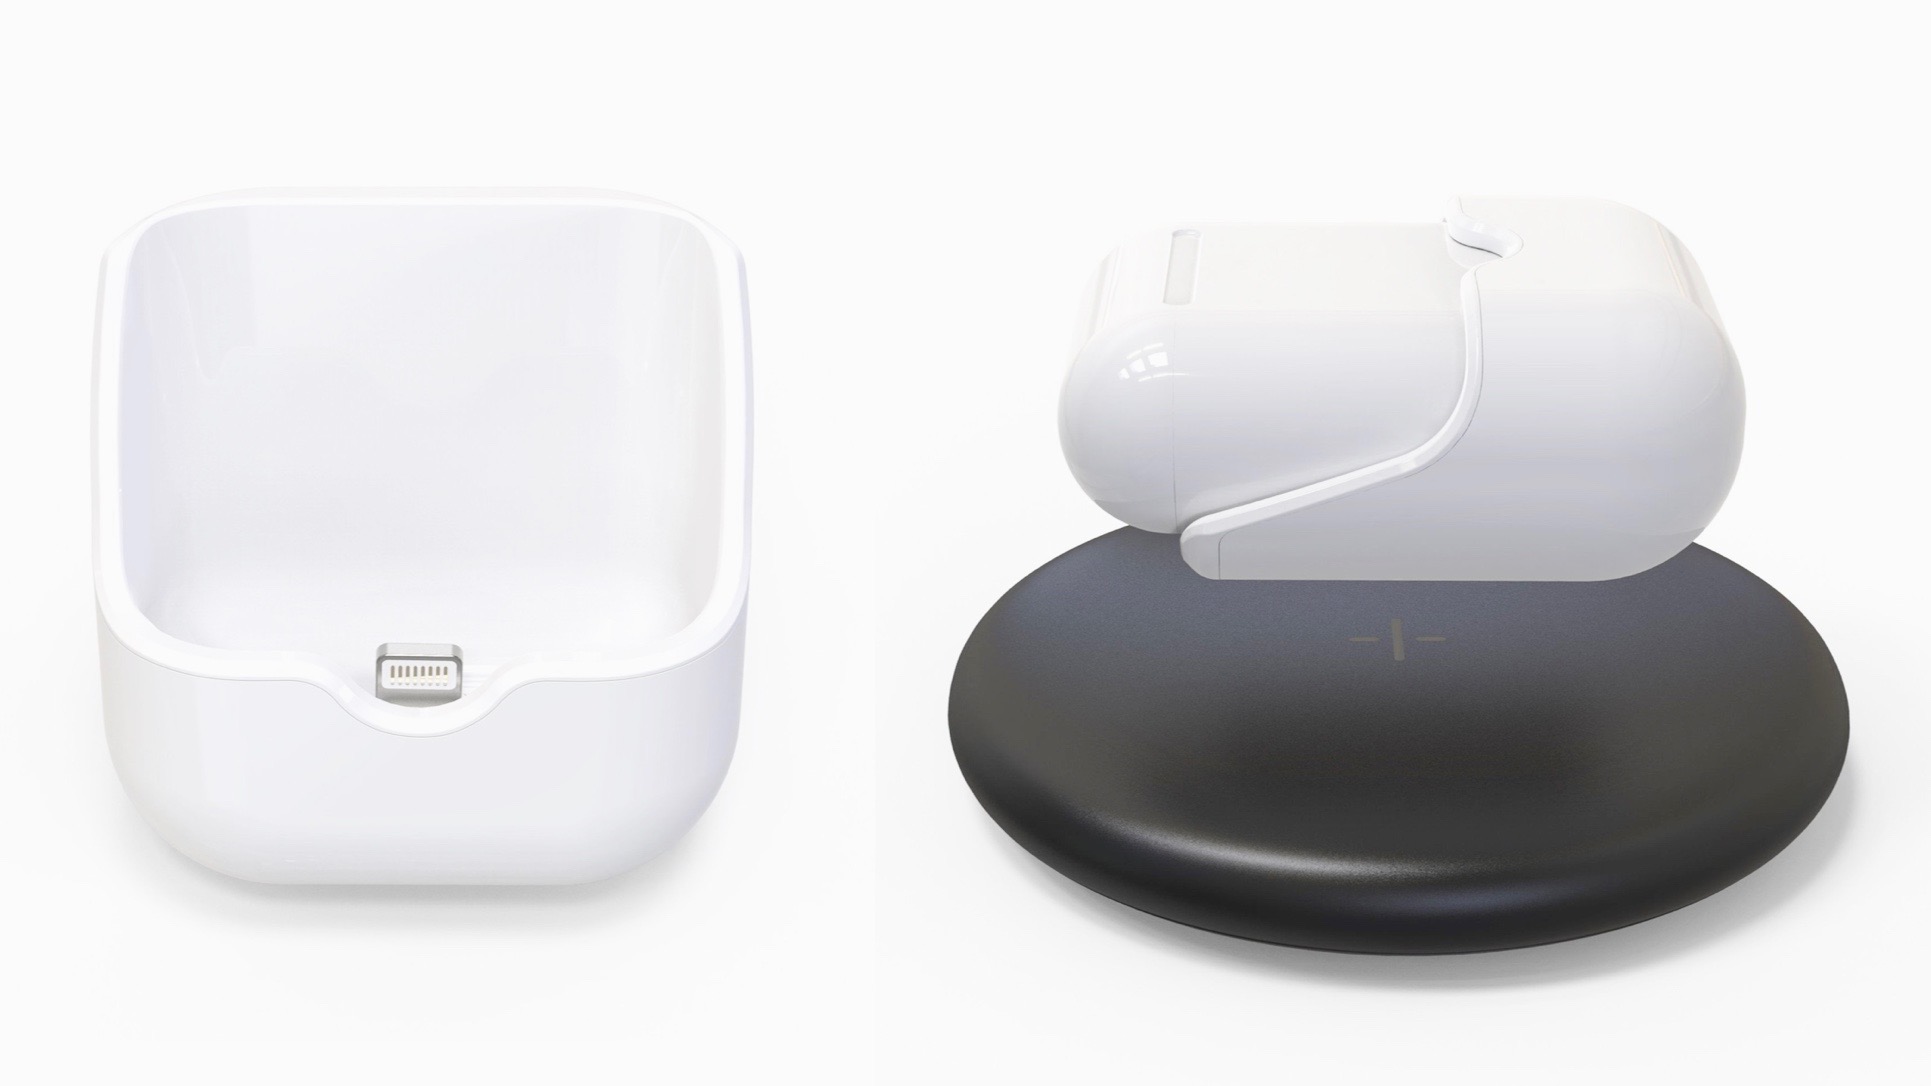 Hyper launches Qi wireless charger for AirPods as Apple remains 